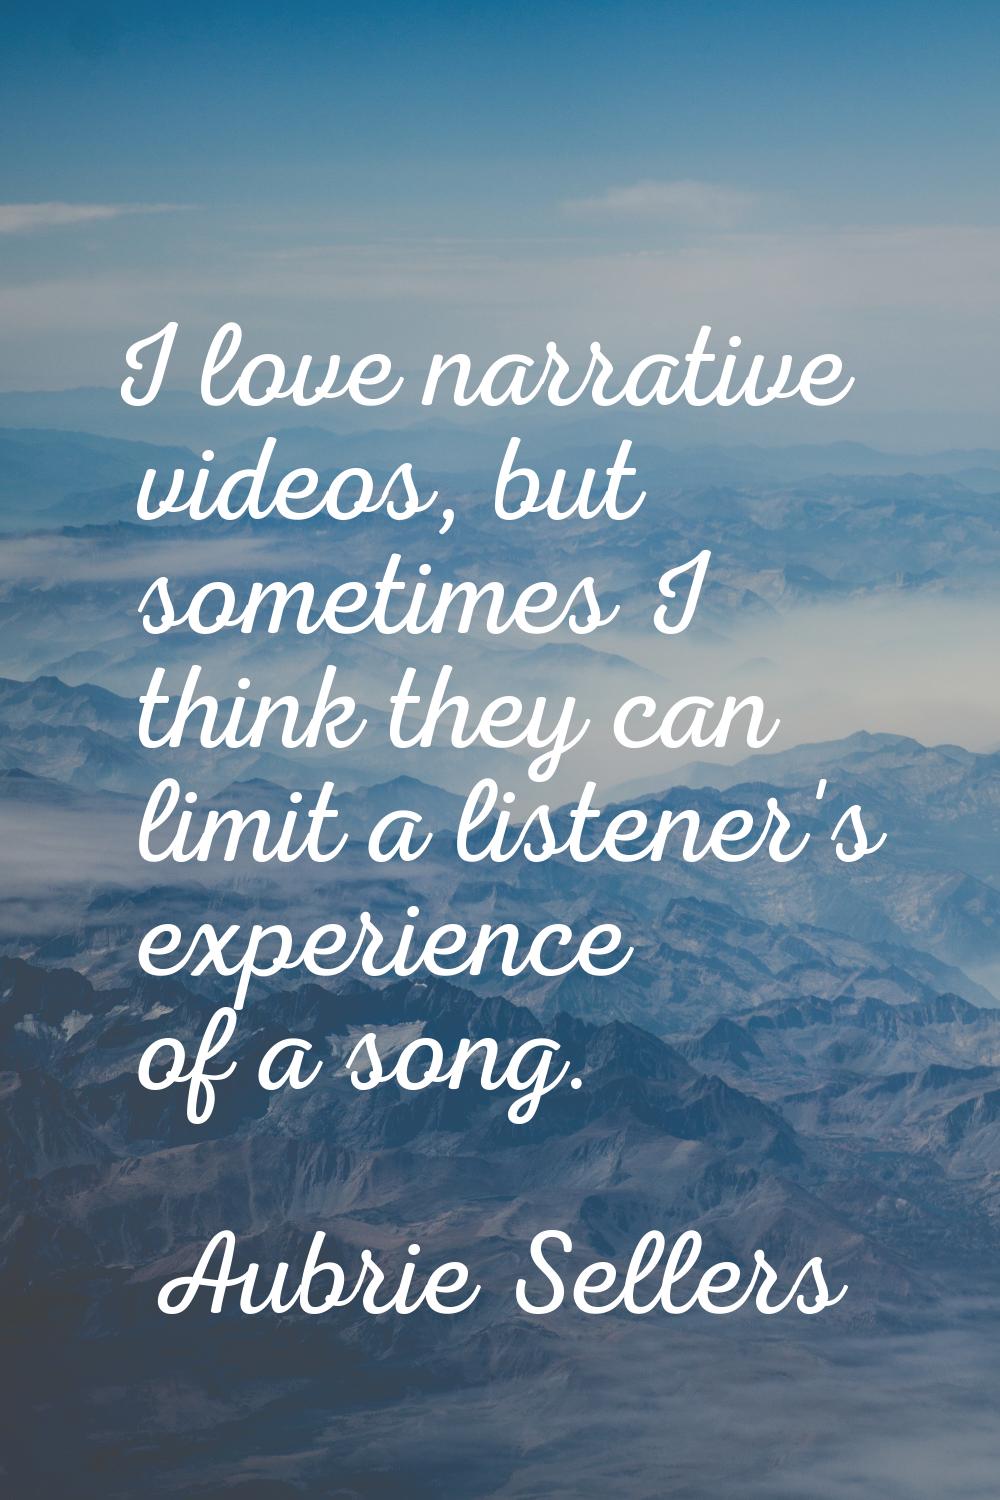 I love narrative videos, but sometimes I think they can limit a listener's experience of a song.